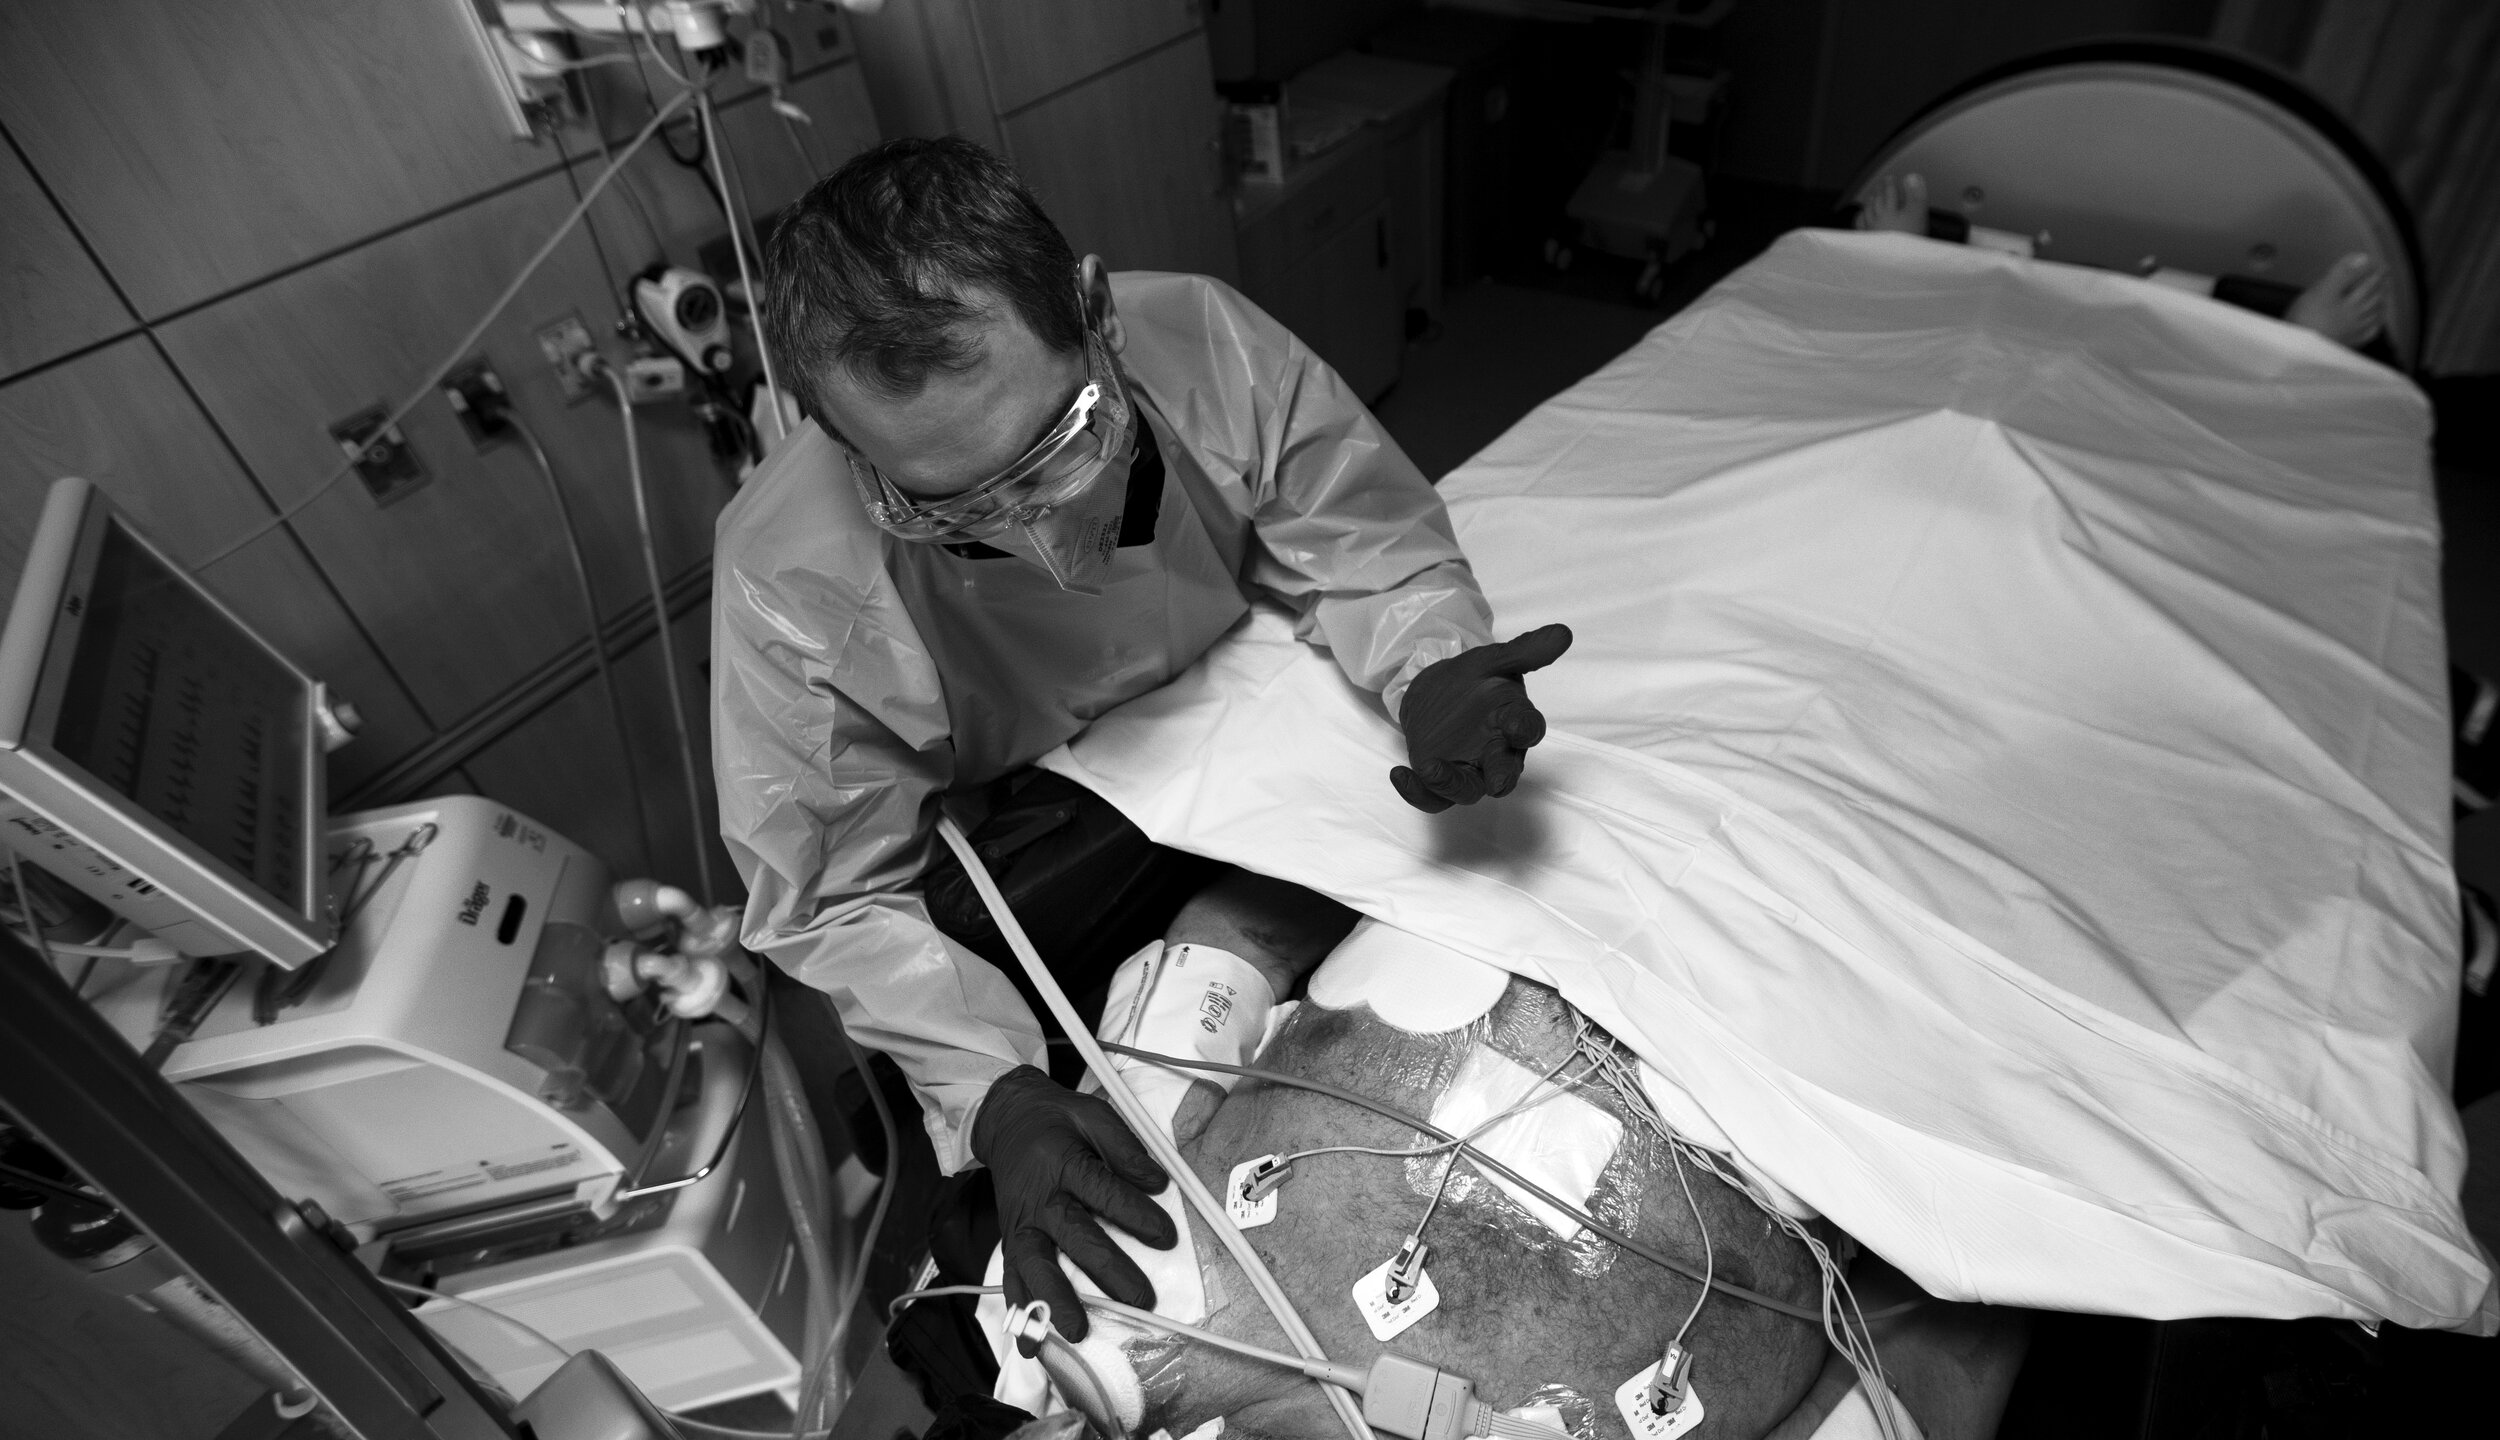  Chaplain Kevin Deegan, left, prays over patient Bob Harris as Bob family is participating via an iPad on Thursday, Dec. 3, 2020 in Mission Hills, CA. Bob has been on a ventilator for over 30 days. He is in a rotoprone bed that will rotate him to a p